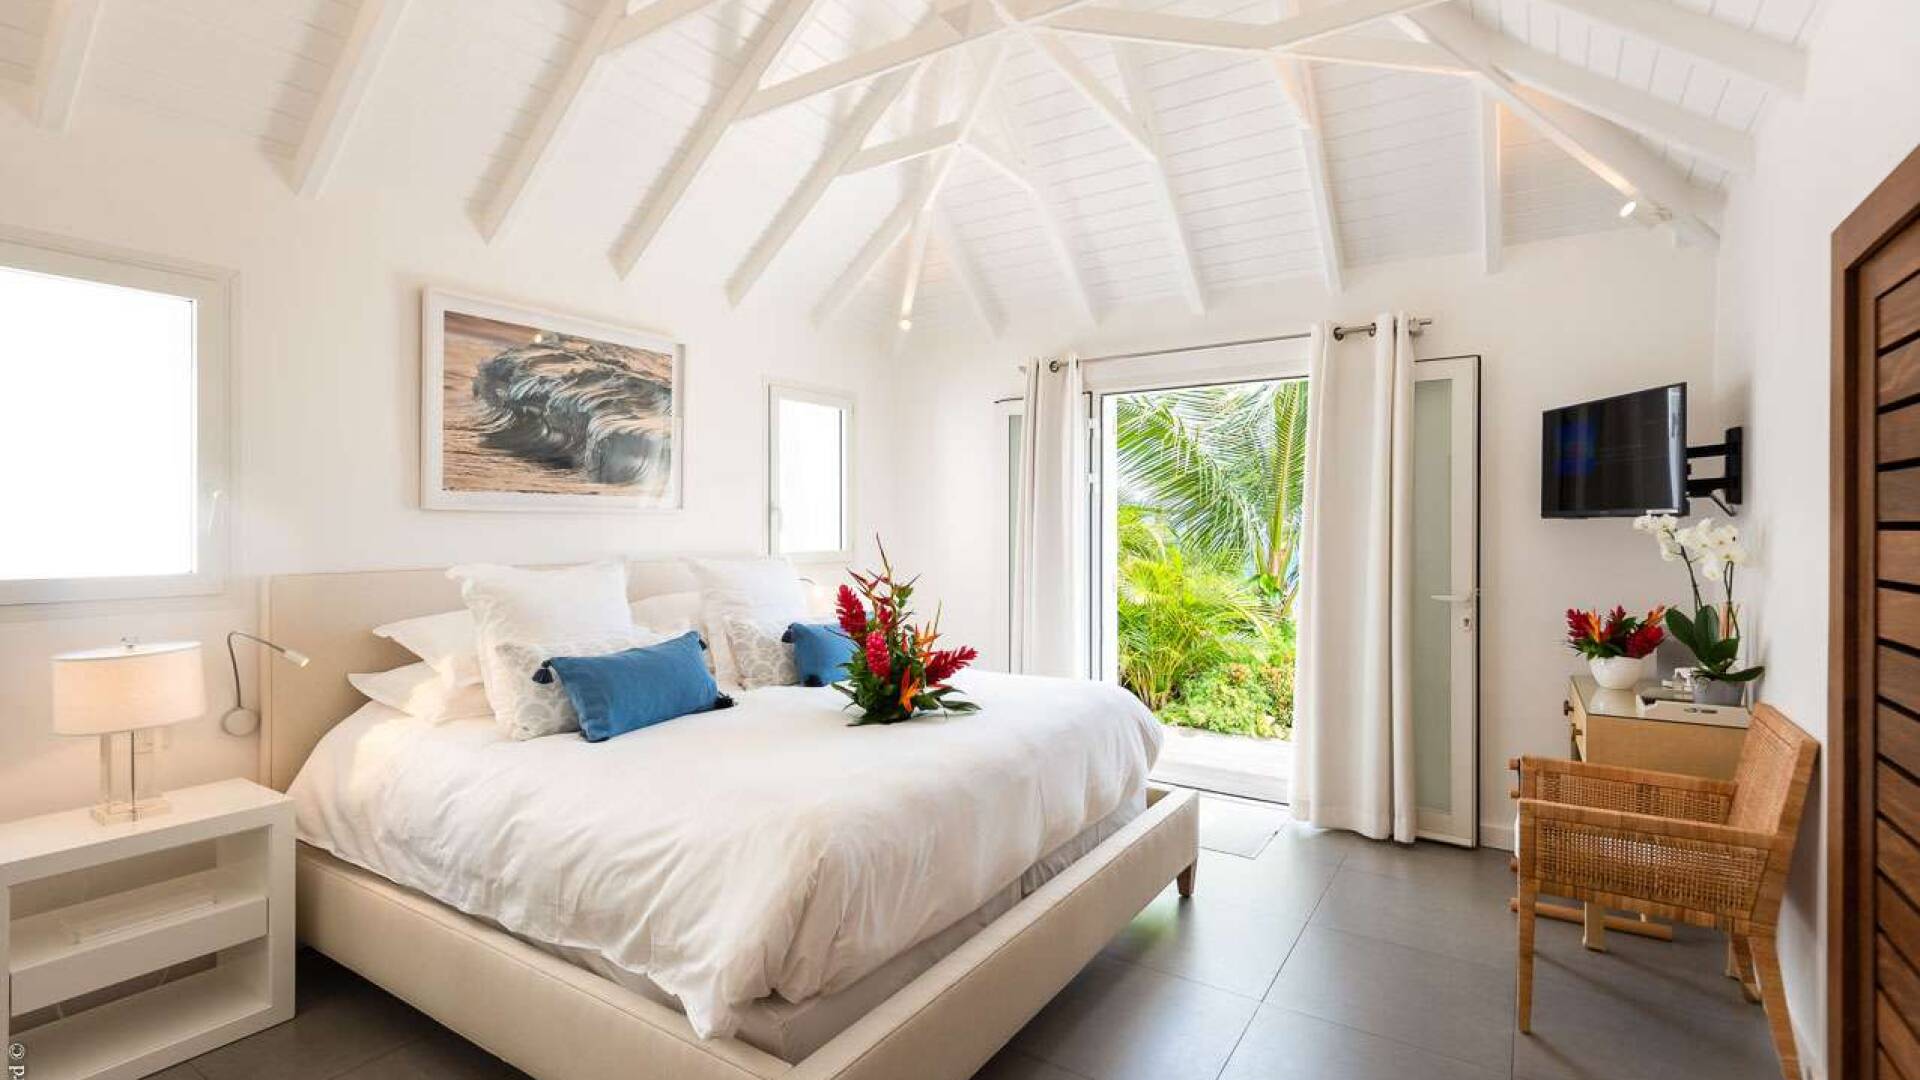 Bedroom at WV RIG, St. Jean, St. Barthelemy